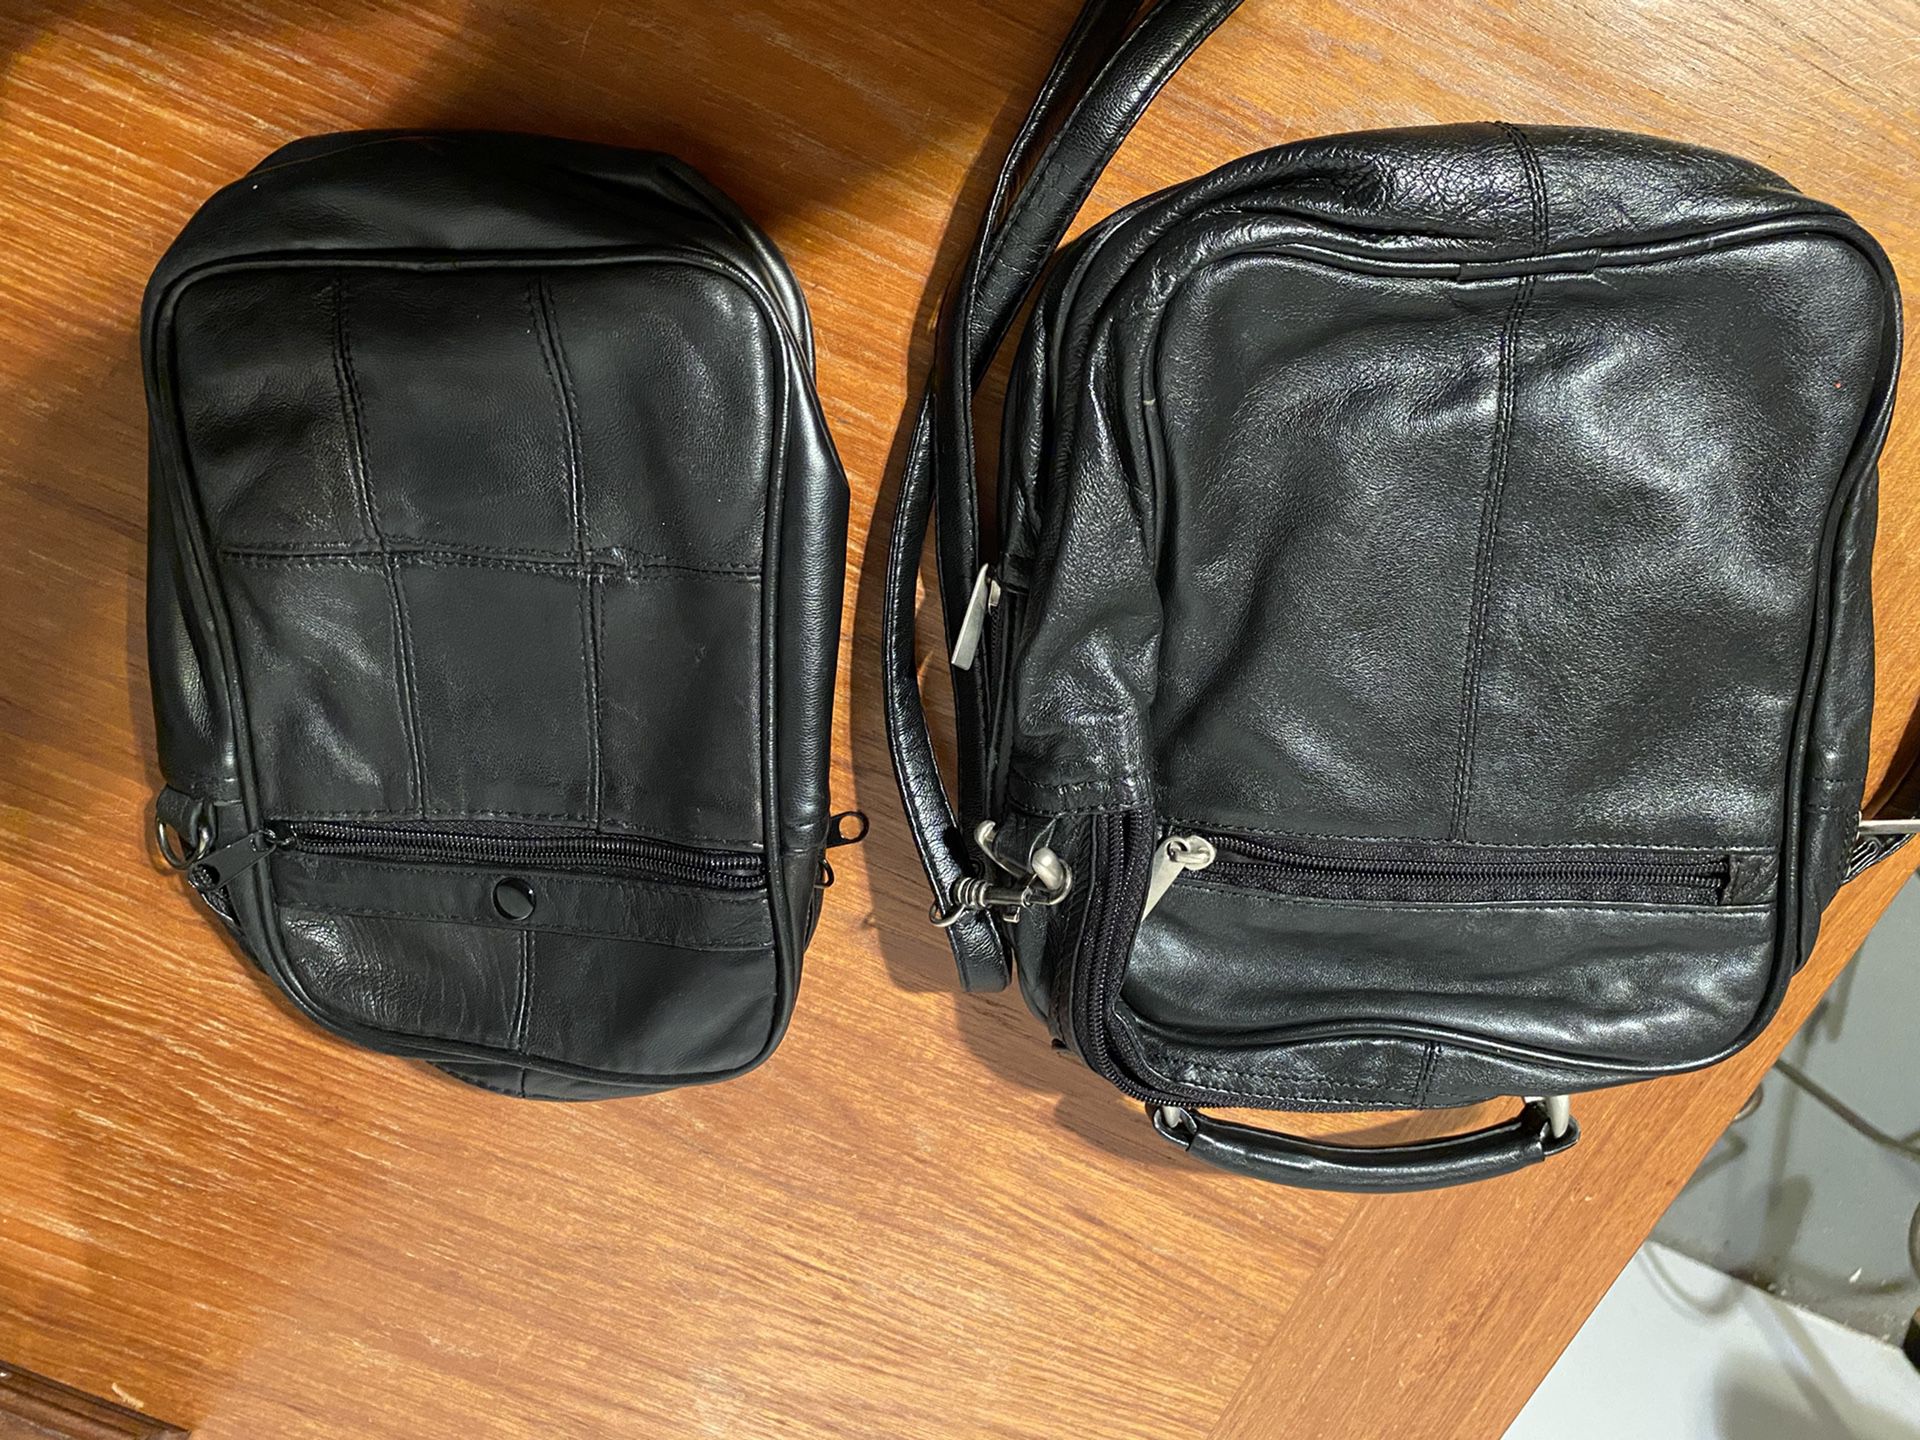 Two (2) Men’s  Leather Messenger Bags Black